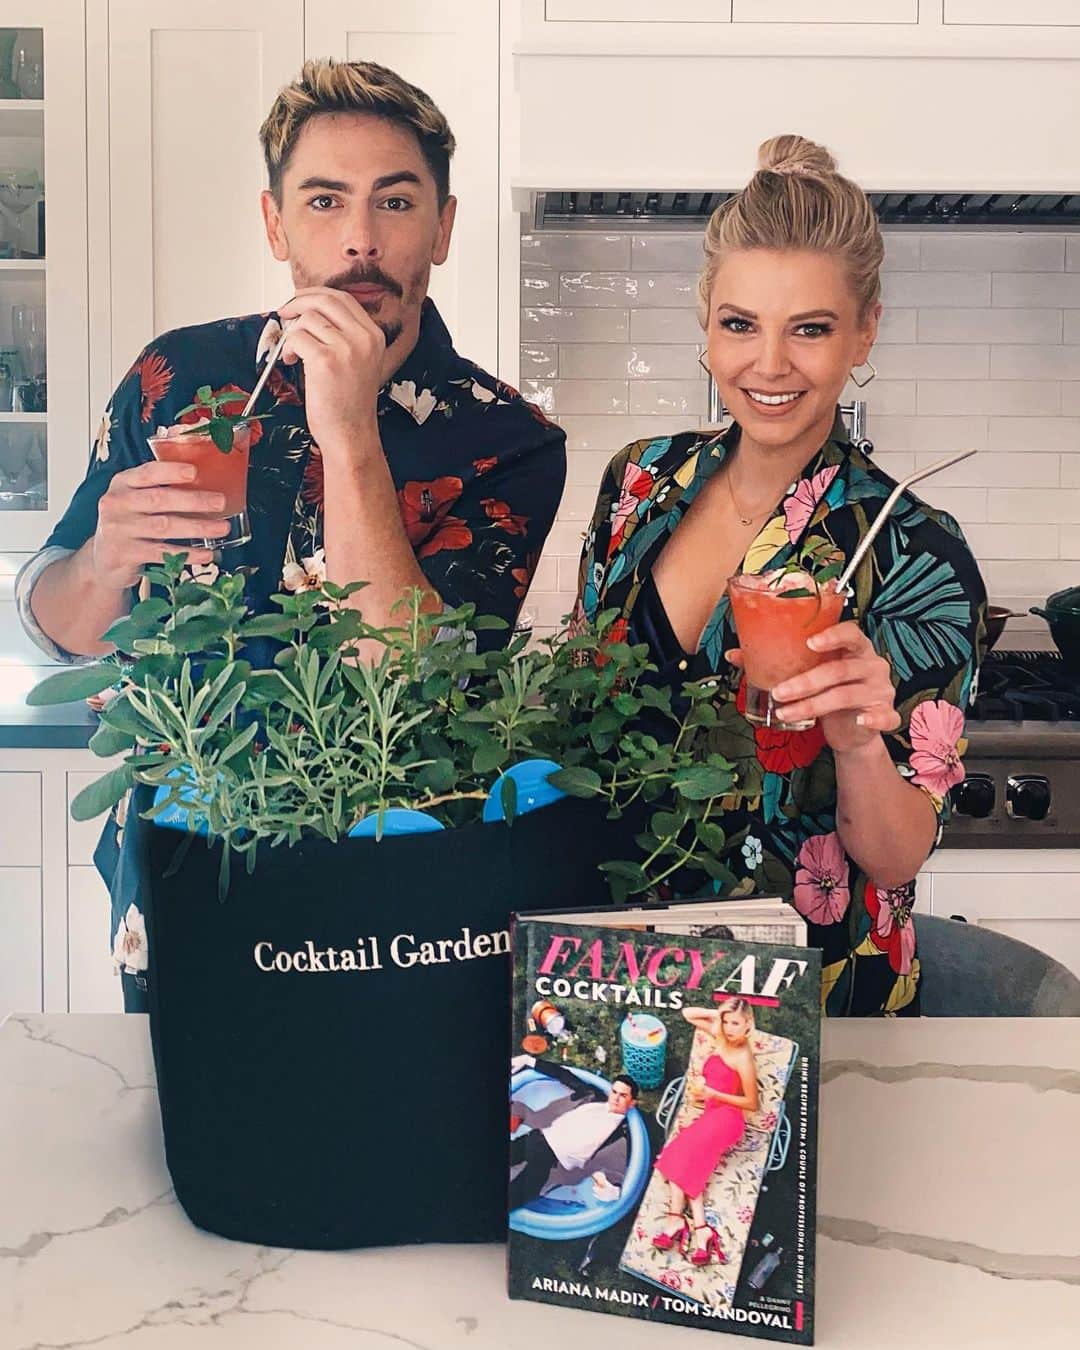 アリアナ・マディックスさんのインスタグラム写真 - (アリアナ・マディックスInstagram)「A FANCY AF GIVEAWAY 🌱🍸 ! Congratulations to  @nicolexcampbell_ on your win!!! 🌱🍸 I learned about @Gardenuity in September, and once I saw their Cocktail Garden, I knew @tomsandoval1 and I had to have it! It has been so fun to experiment with new herbs and simple syrups in our cocktails while we've been spending more time at home. I'm also proud to say that after two months, our garden is still THRIVING 🌿☀️  —  @tomsandoval1 and I can’t believe we’re coming up on the one year anniversary of #FancyAfCocktails  and we can’t think of a better way to celebrate this milestone than with the Fancy AF Cocktail Garden Collection! We'll be Growing for Good because $5 from every purchased garden will be donated to the James Beard Open For Good Foundation to help support restaurants during the COVID-19 Pandemic. You can purchase the Fancy AF Garden Collection via the link in my bio. —  @tomsandoval1 and I will also be going LIVE on Instagram on Thursday, December 3 at 5 PM PST with the @Gardenuity team! We’ll be mixing some of our favorite #fancyafcocktails with fresh herbs and even introducing a new one. We’re so excited and want to make sure you all join us with your new Fancy AF Cocktail Gardens! We're kicking off this fabulous partnership with a Fancy AF Cocktail Garden Giveaway - one lucky winner will receive the complete bundle!  —  Here’s how to enter -  1. Follow me @ariana252525, @tomsandoval1, and @Gardenuity  2. Like + tag three friends on this post who you want to have a #fancyafcocktail with  3. BONUS ENTRY - share the giveaway to your story and tag @Gardenuity!  —  Winner will be picked on 11/28! Good luck!  —  *The giveaway is open only to residents of the Continental US aged 21 years or older. Void where prohibited by law. No purchase necessary to participate. The entry period begins at 8pm PST ON 11/23 and ends at 9PM PST TIME on 11/28.  Winner chosen and contacted within 24 hours of the giveaway end.」11月24日 12時59分 - arianamadix